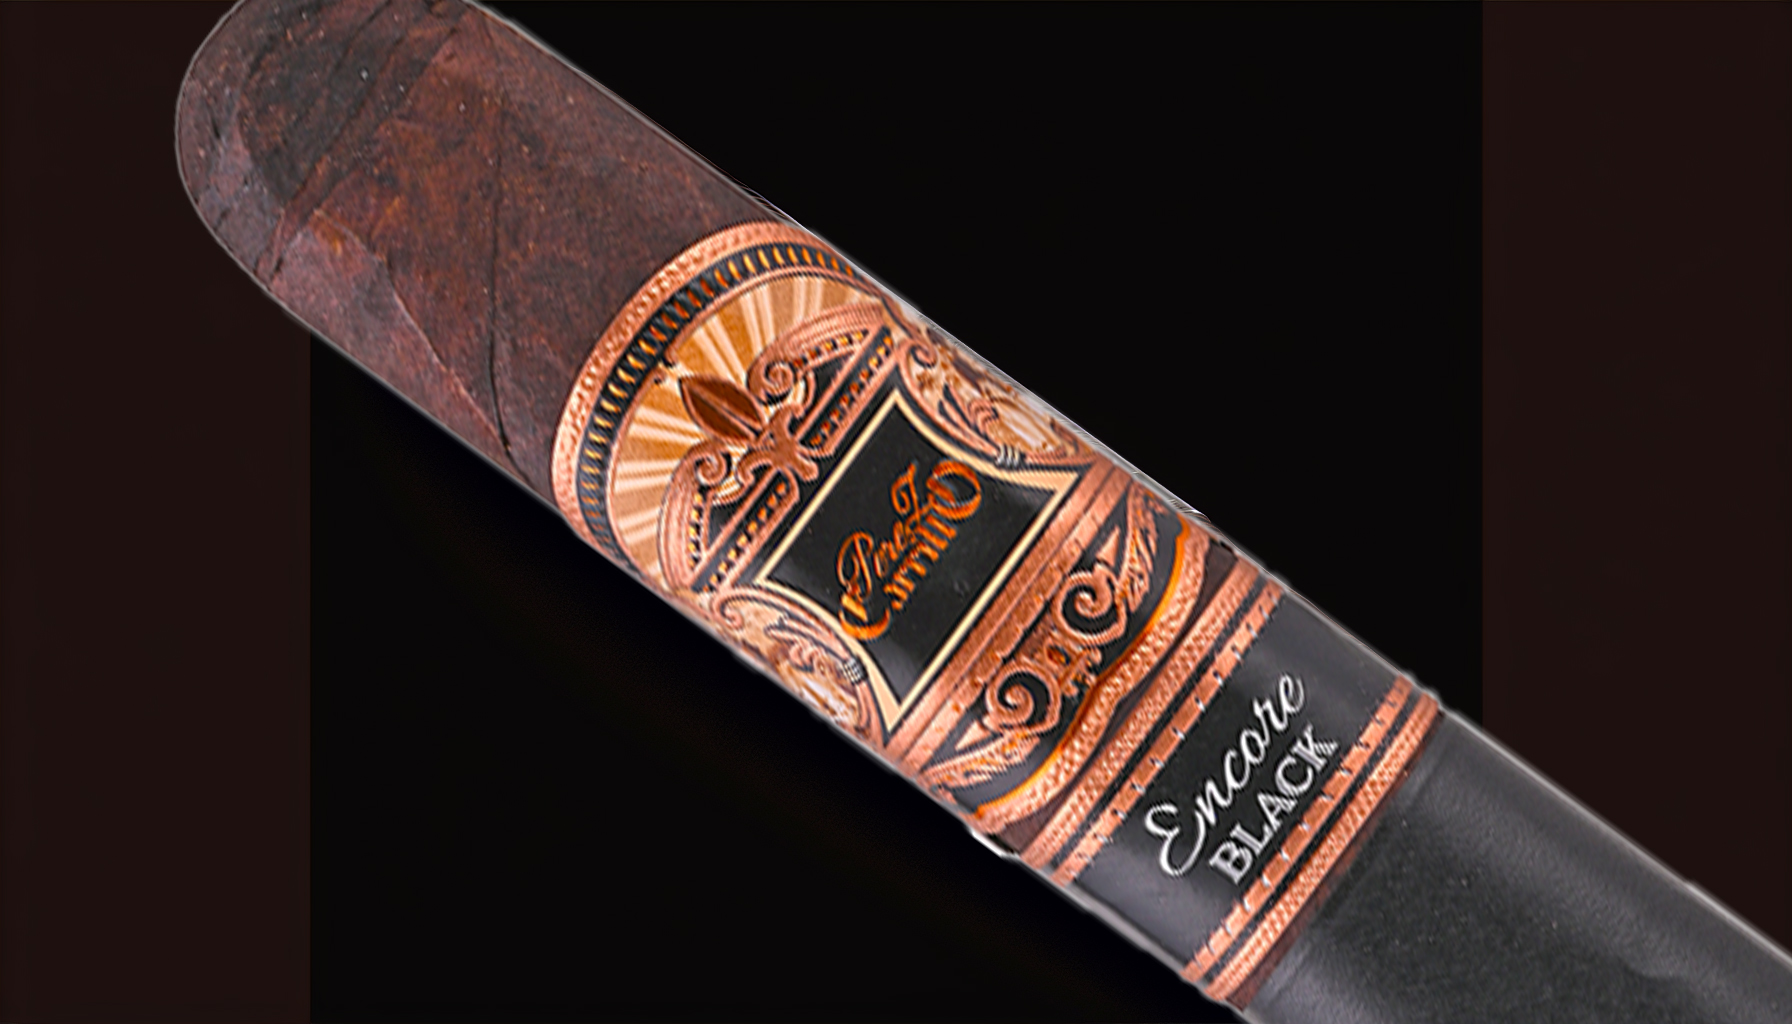 Illustration of a bold and luxurious cigar with a dark Connecticut Broadleaf Maduro wrapper, representing the e.p Carrillo Encore Black